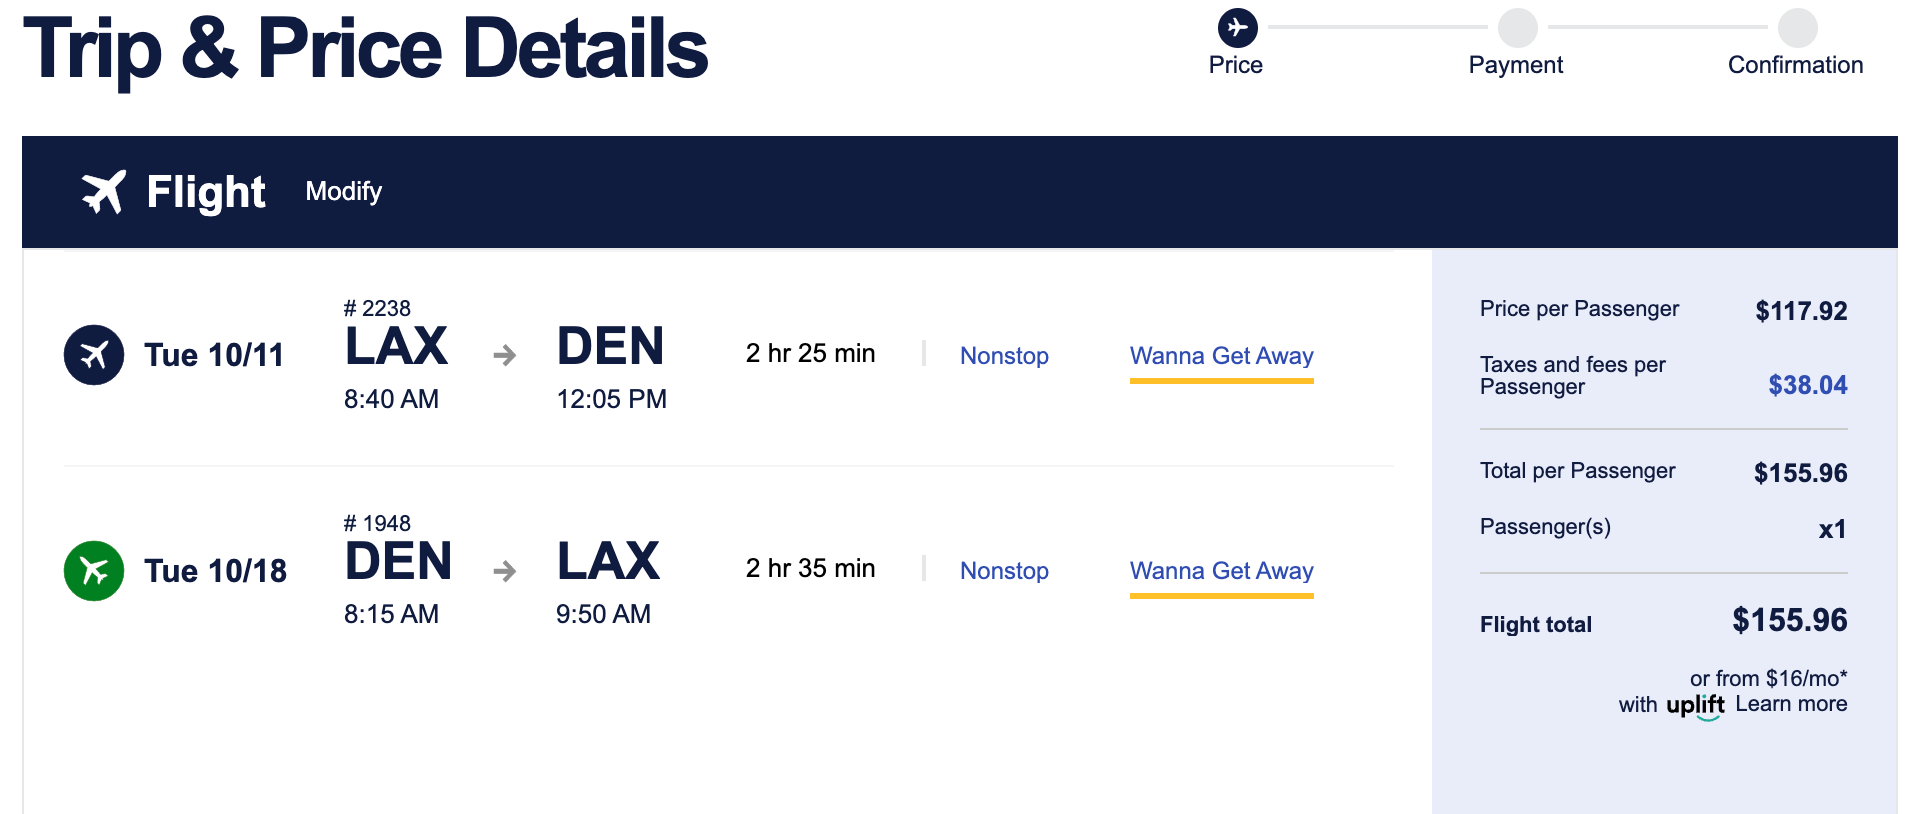 Screenshot from Southwest Airlines